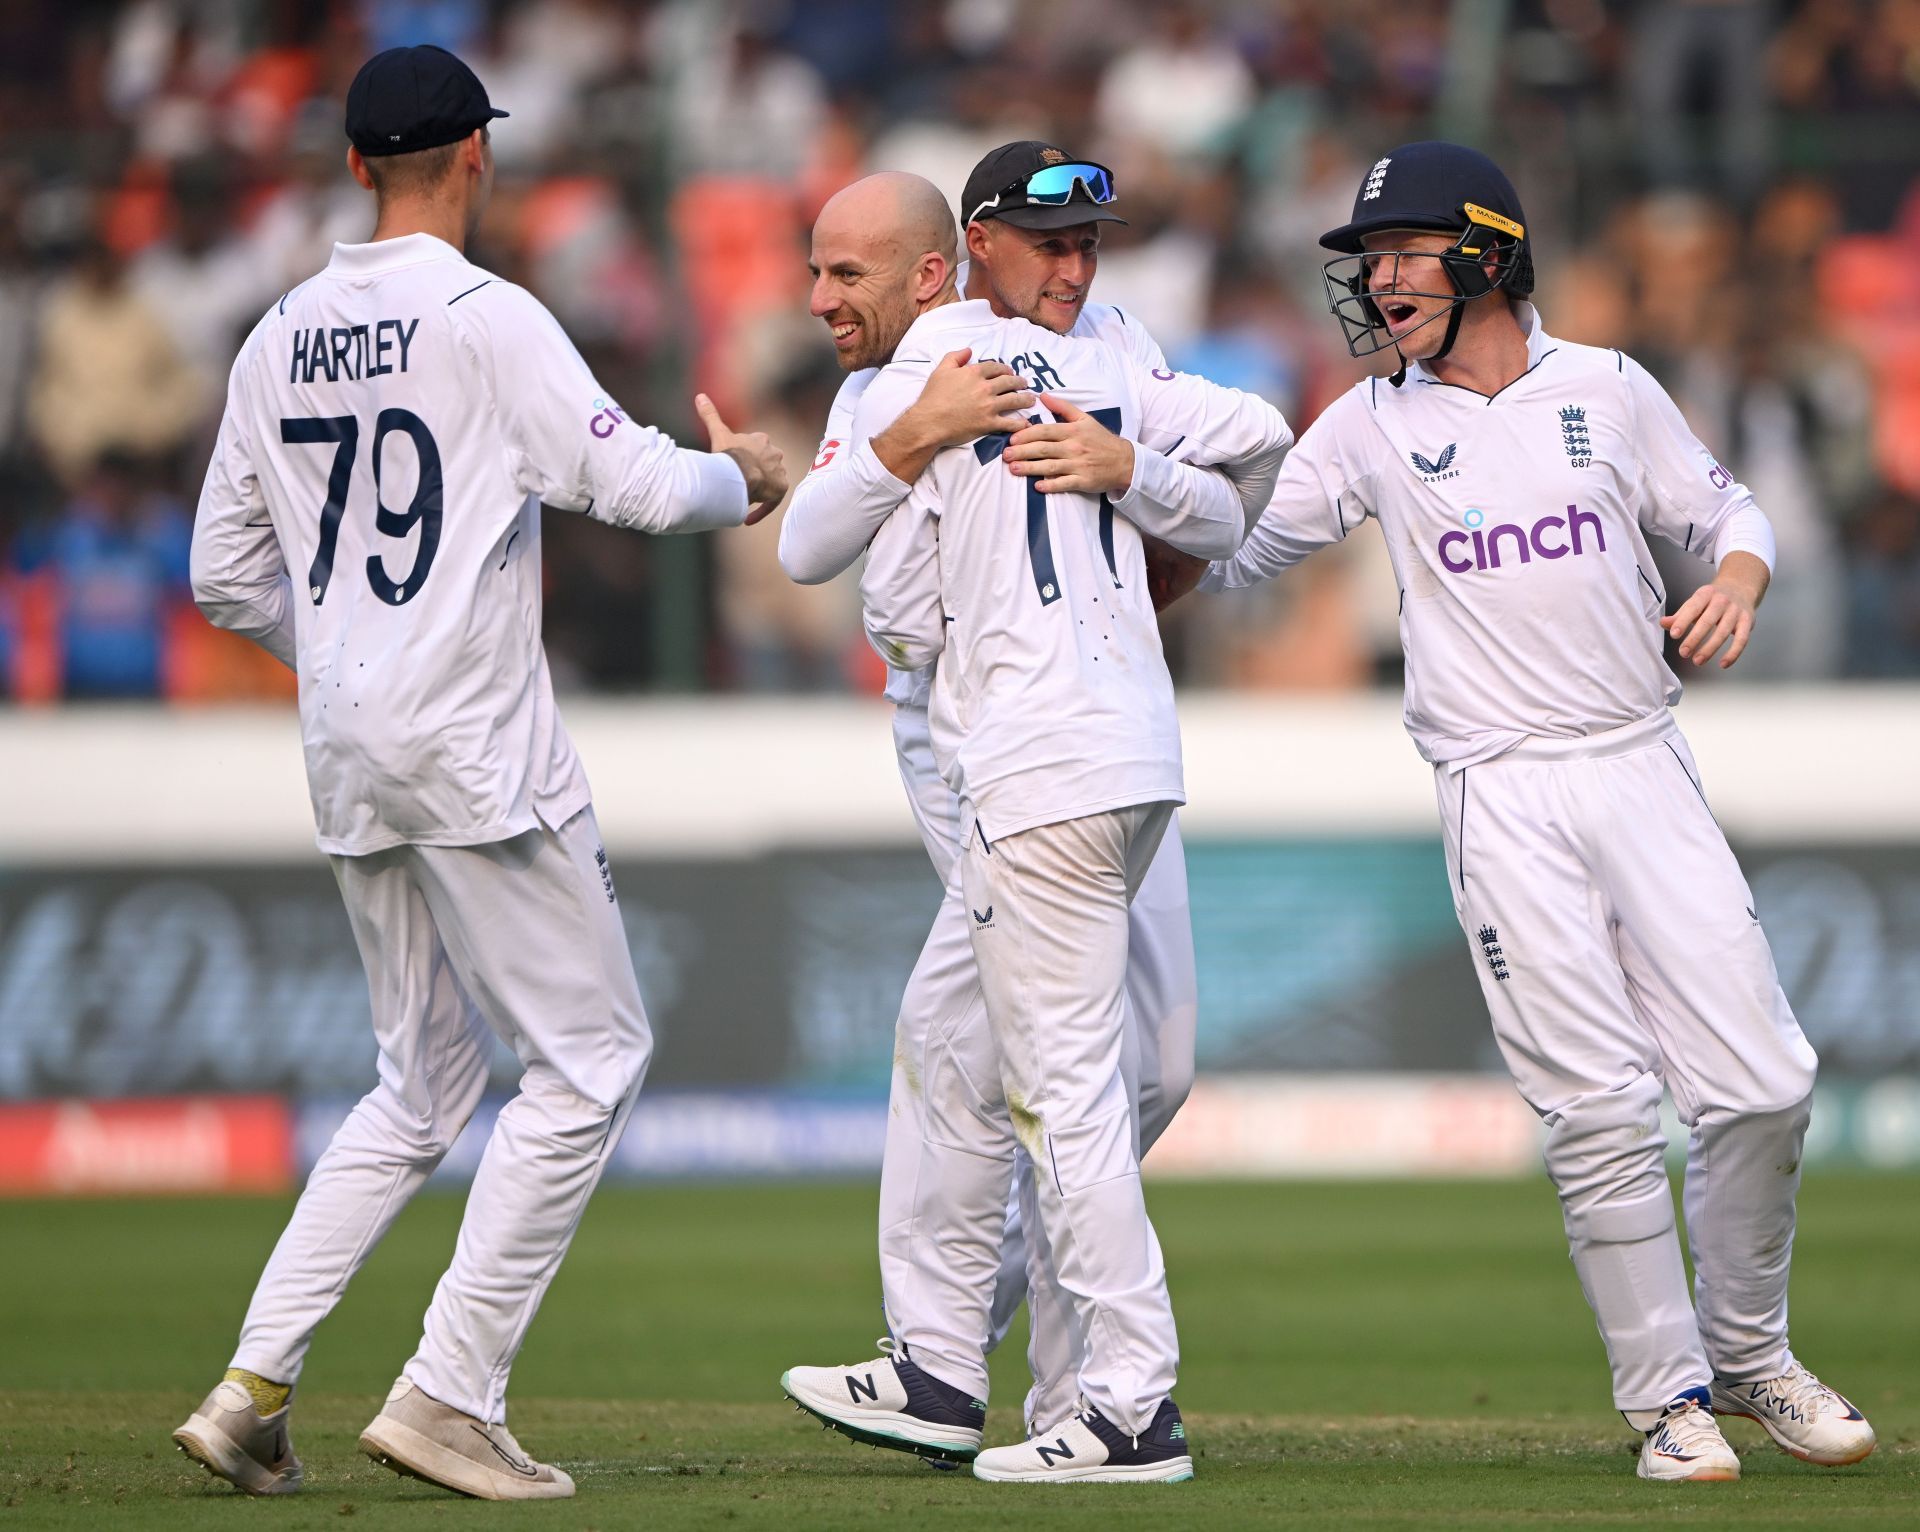 Jack Leach picked up the only Indian wicket to fall on Day 1